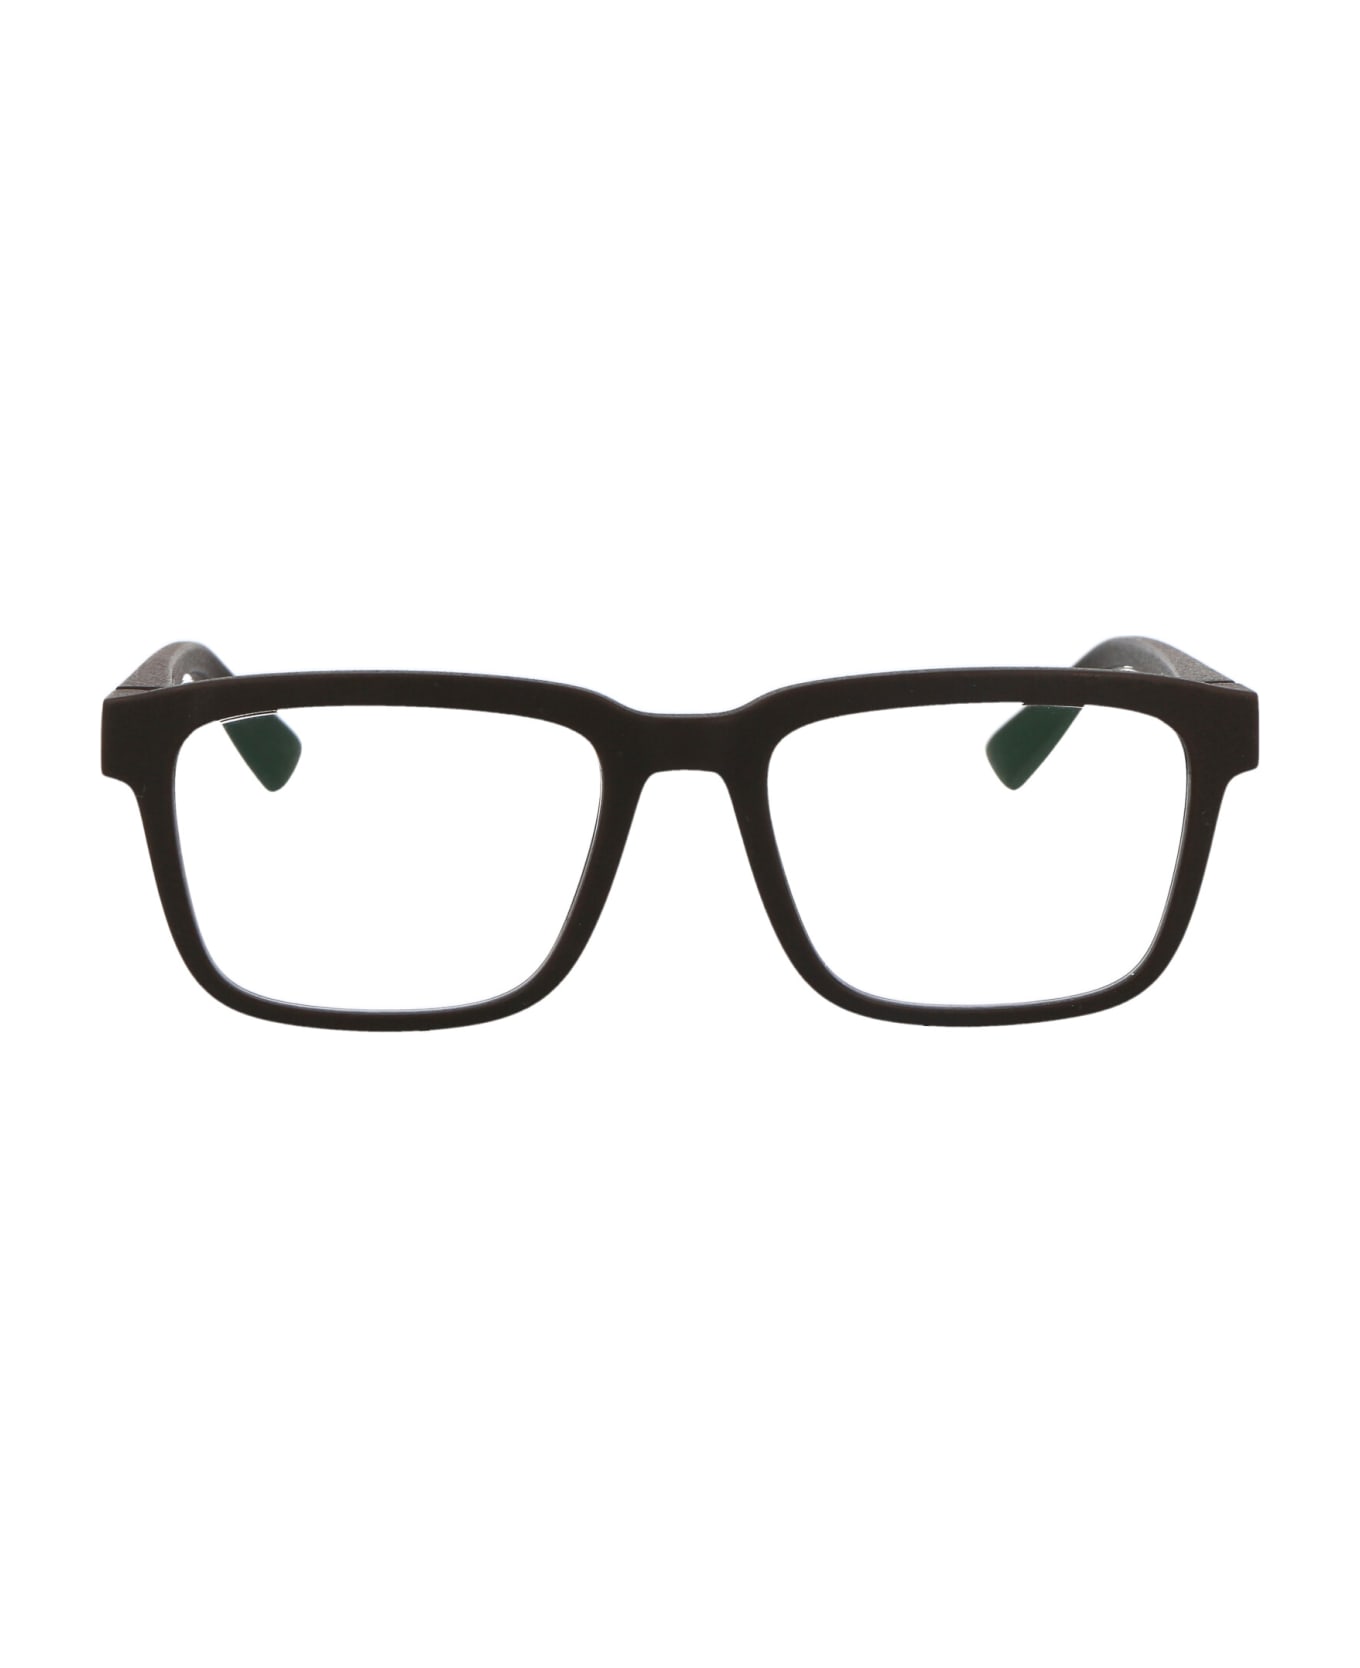 Mykita Helicon Glasses - 355 MD22 Ebony Brown Clear